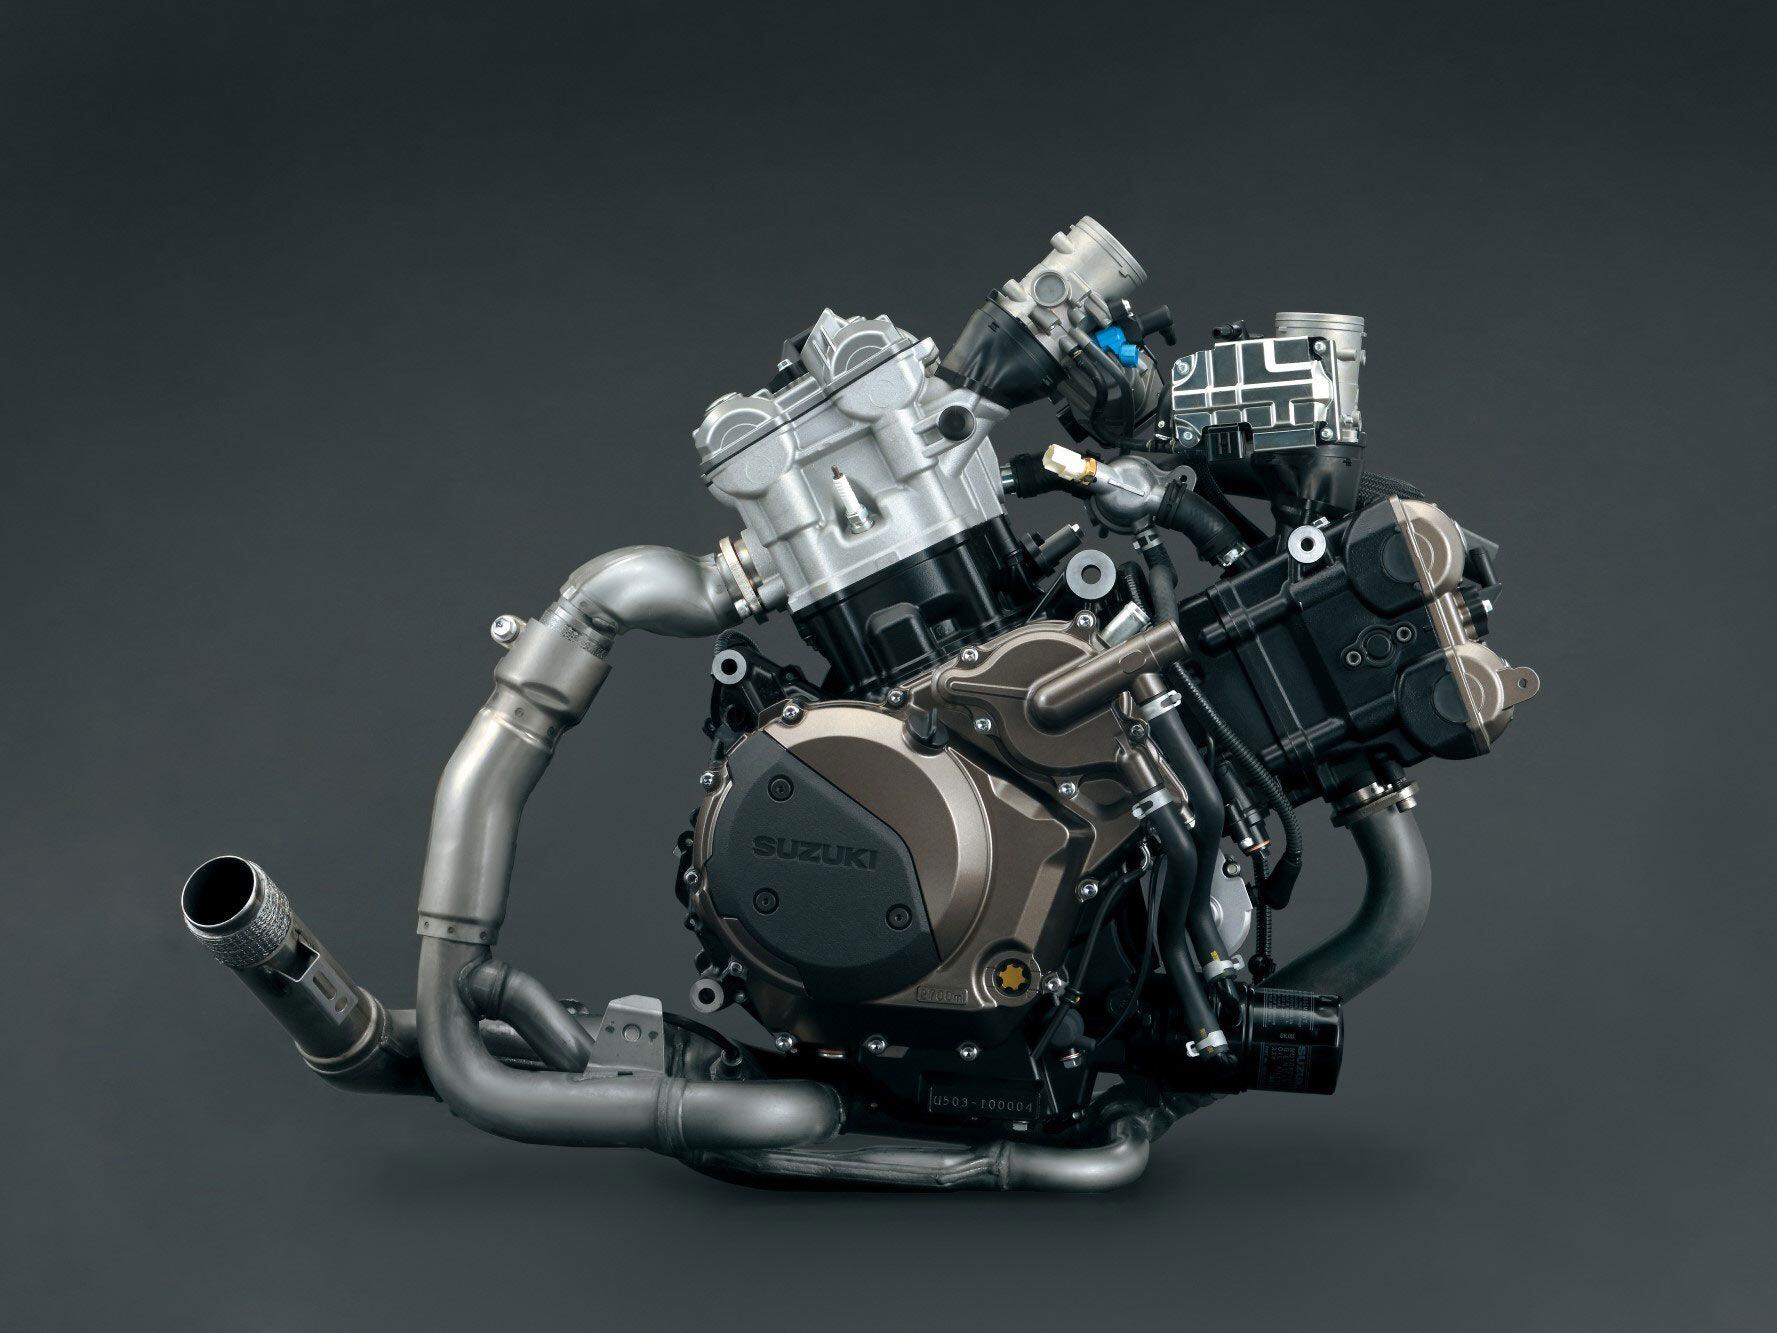 Upgrades to the V-Strom’s engine are limited to new sodium-filled exhaust valves, and updated first- and sixth-gear transmission ratios.